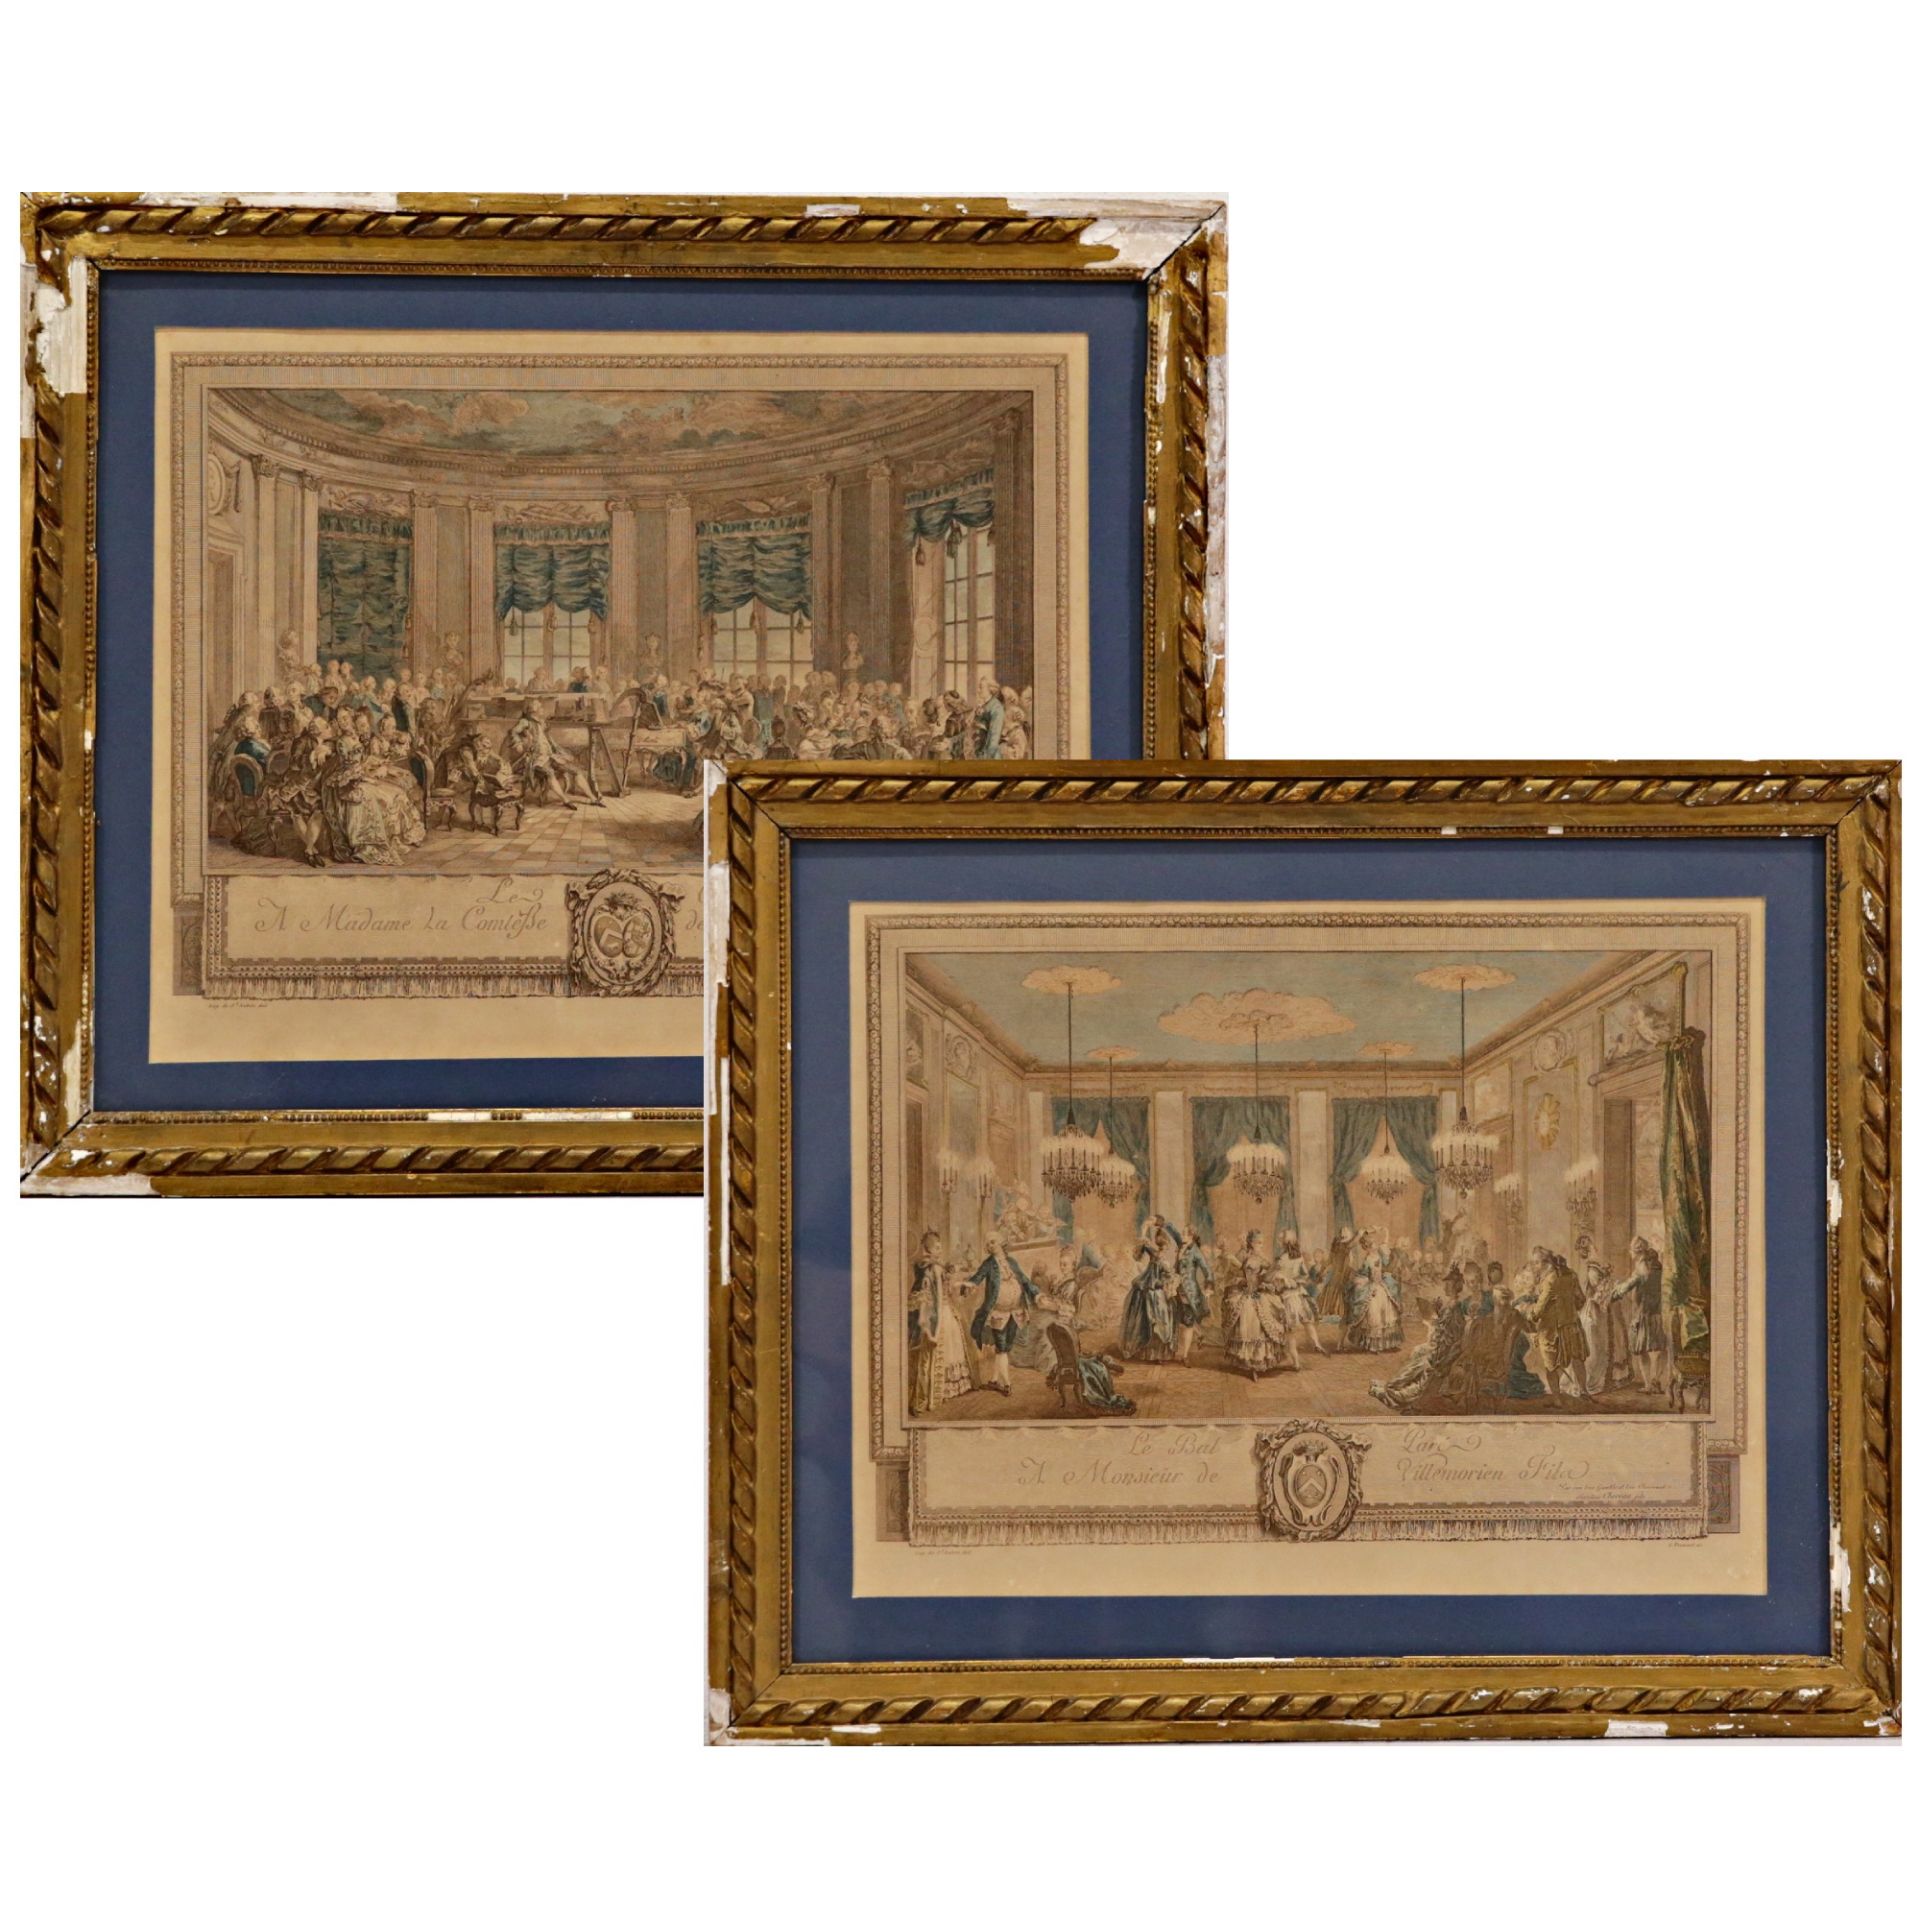 Two (2) late 18th/early 19th Century L. Provost colored engravings from drawings by St. Aubin